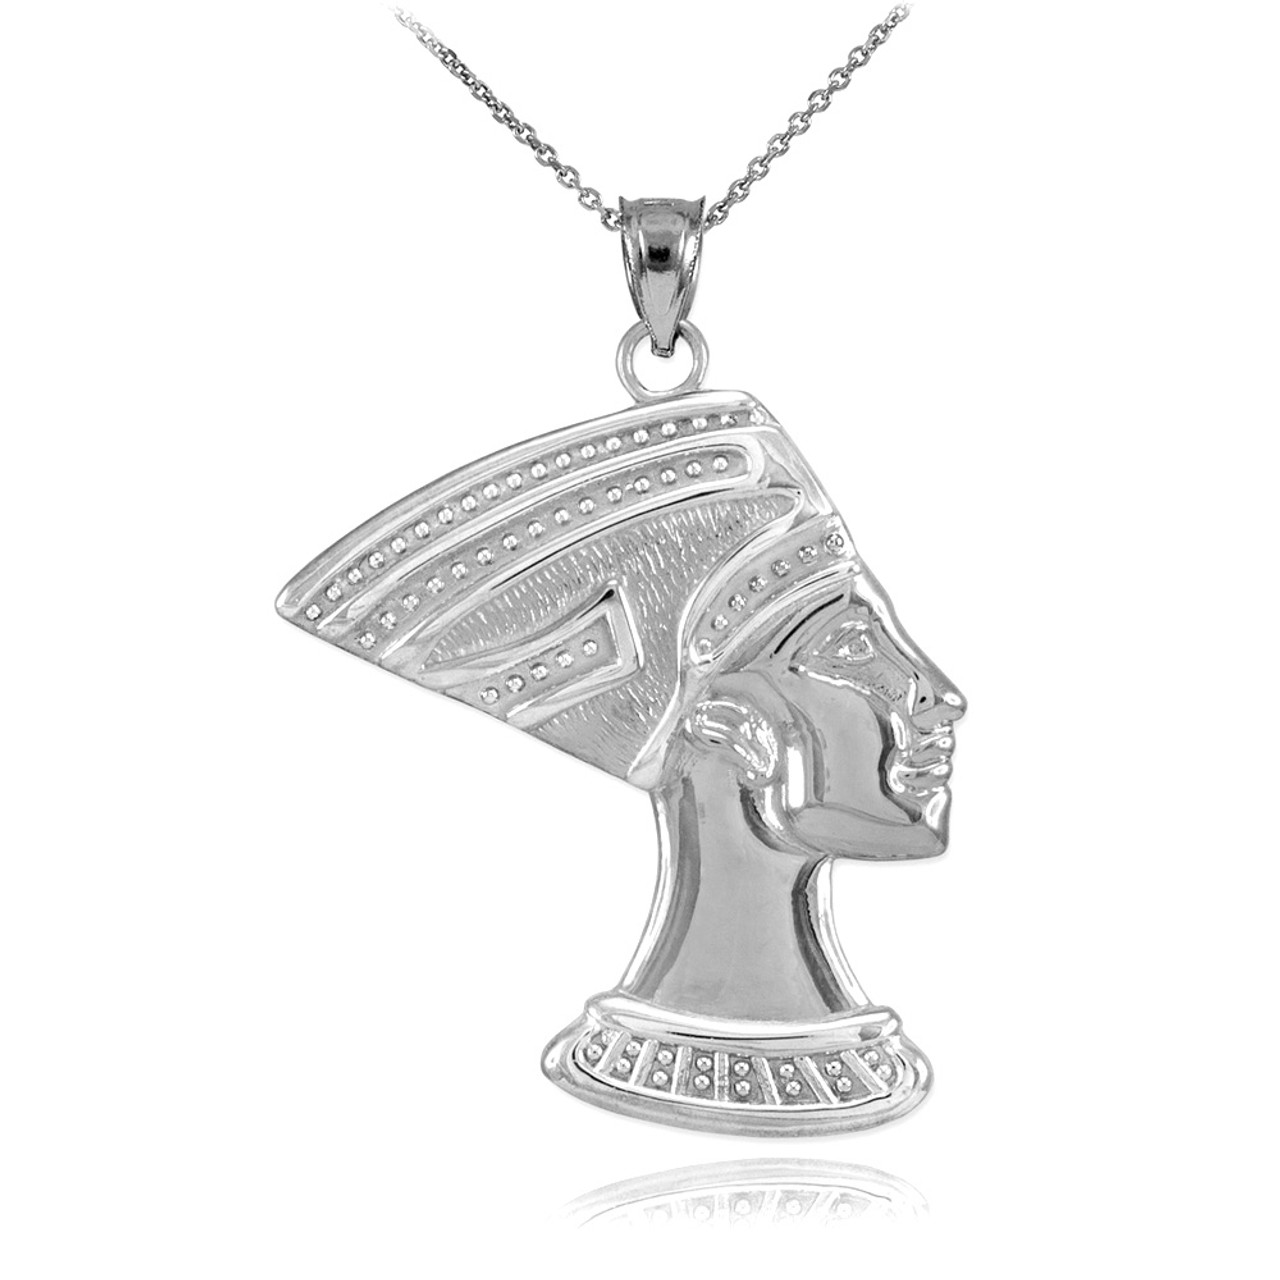 Details about   New Rhodium Plated 925 Sterling Silver Egyptian Queen Nefertiti Charm Pendant 